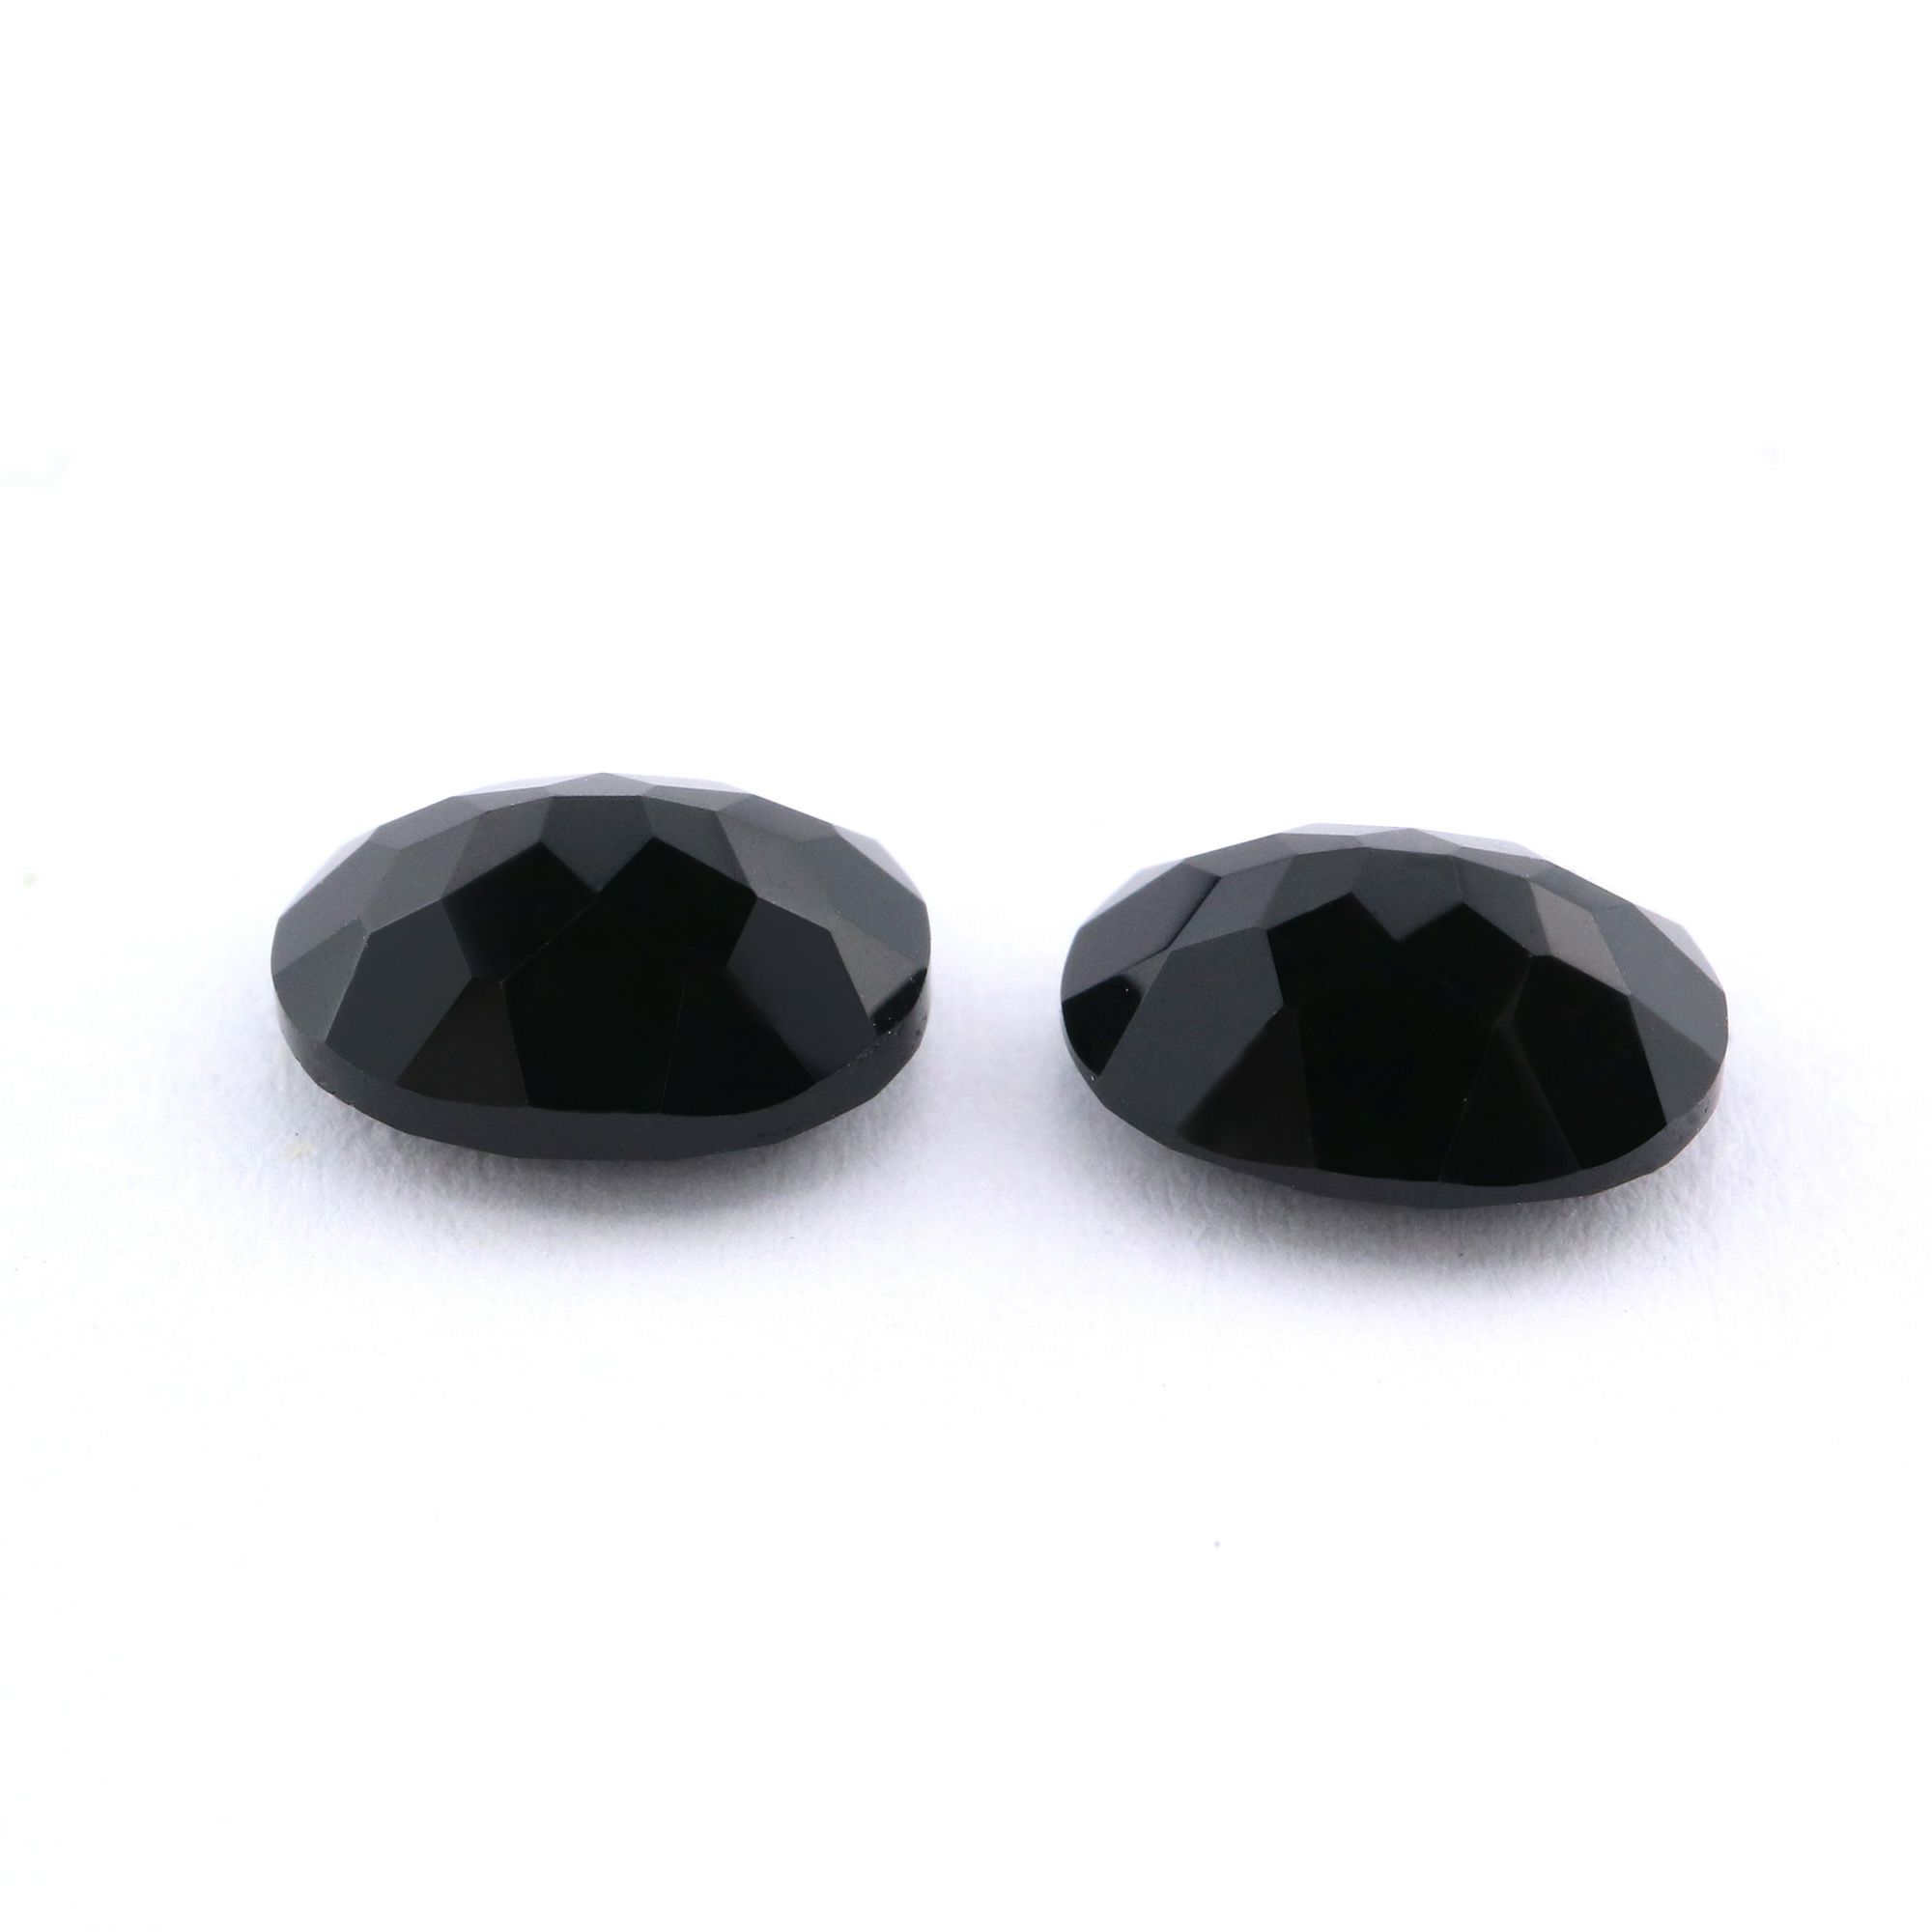 5Pcs Natural Oval Black Onyx Faceted Cut Loose Gemstone Nature Semi Precious Stone DIY Jewelry Supplies 4120129 - Click Image to Close